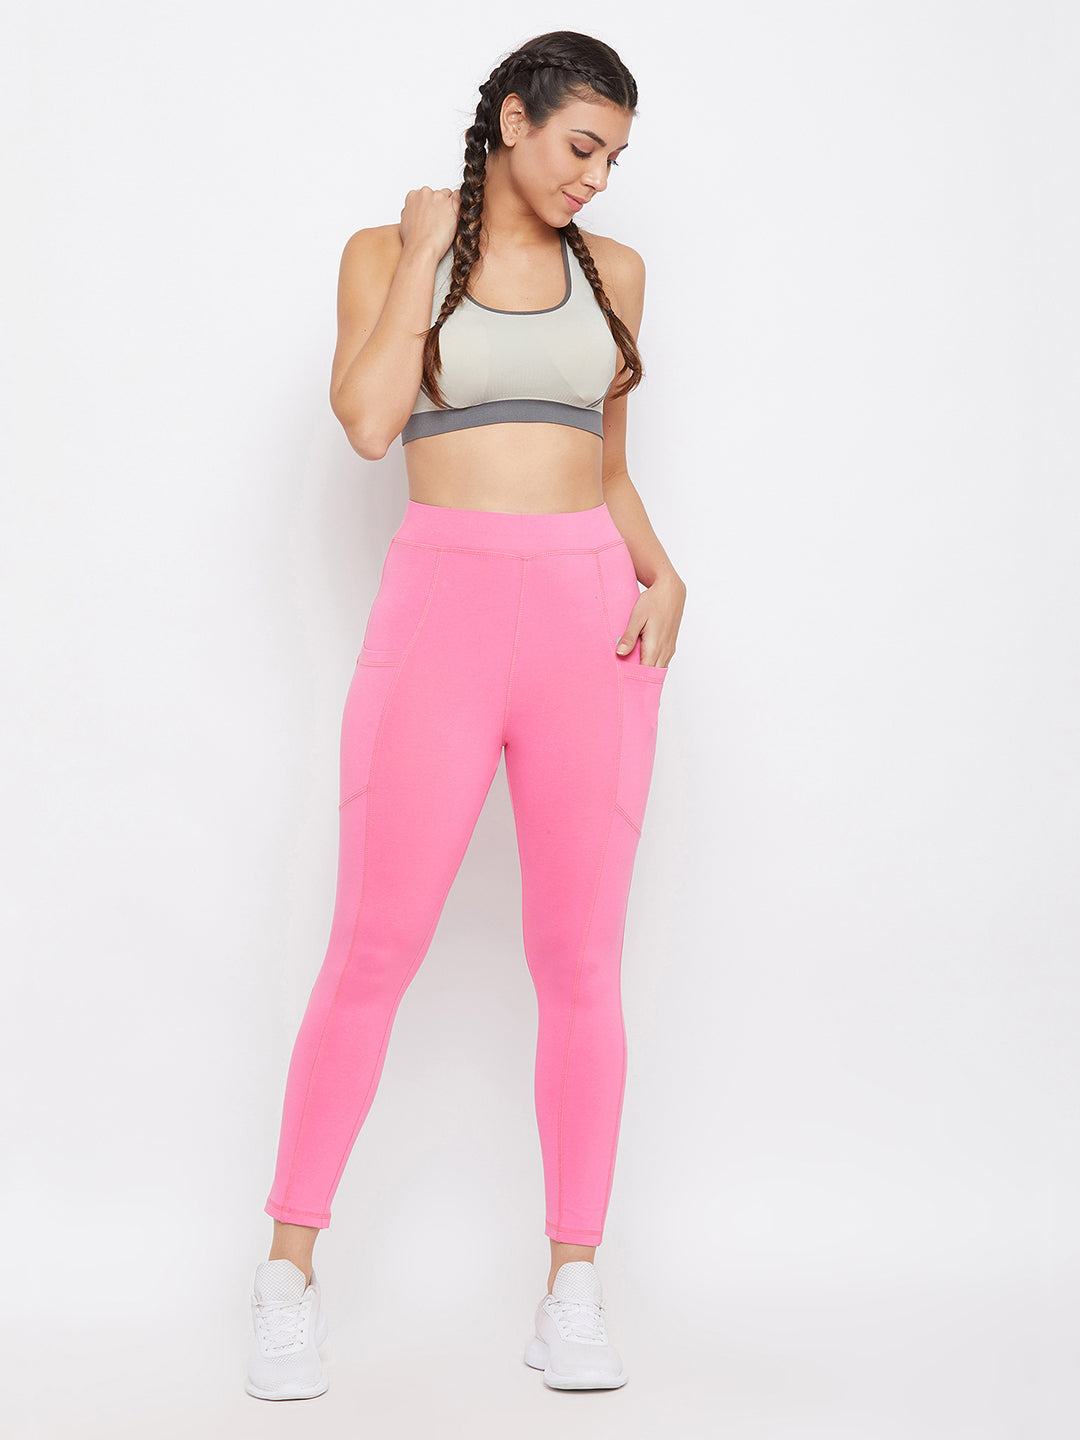 Baby Pink Snug Fit Active Ankle-Length Tights